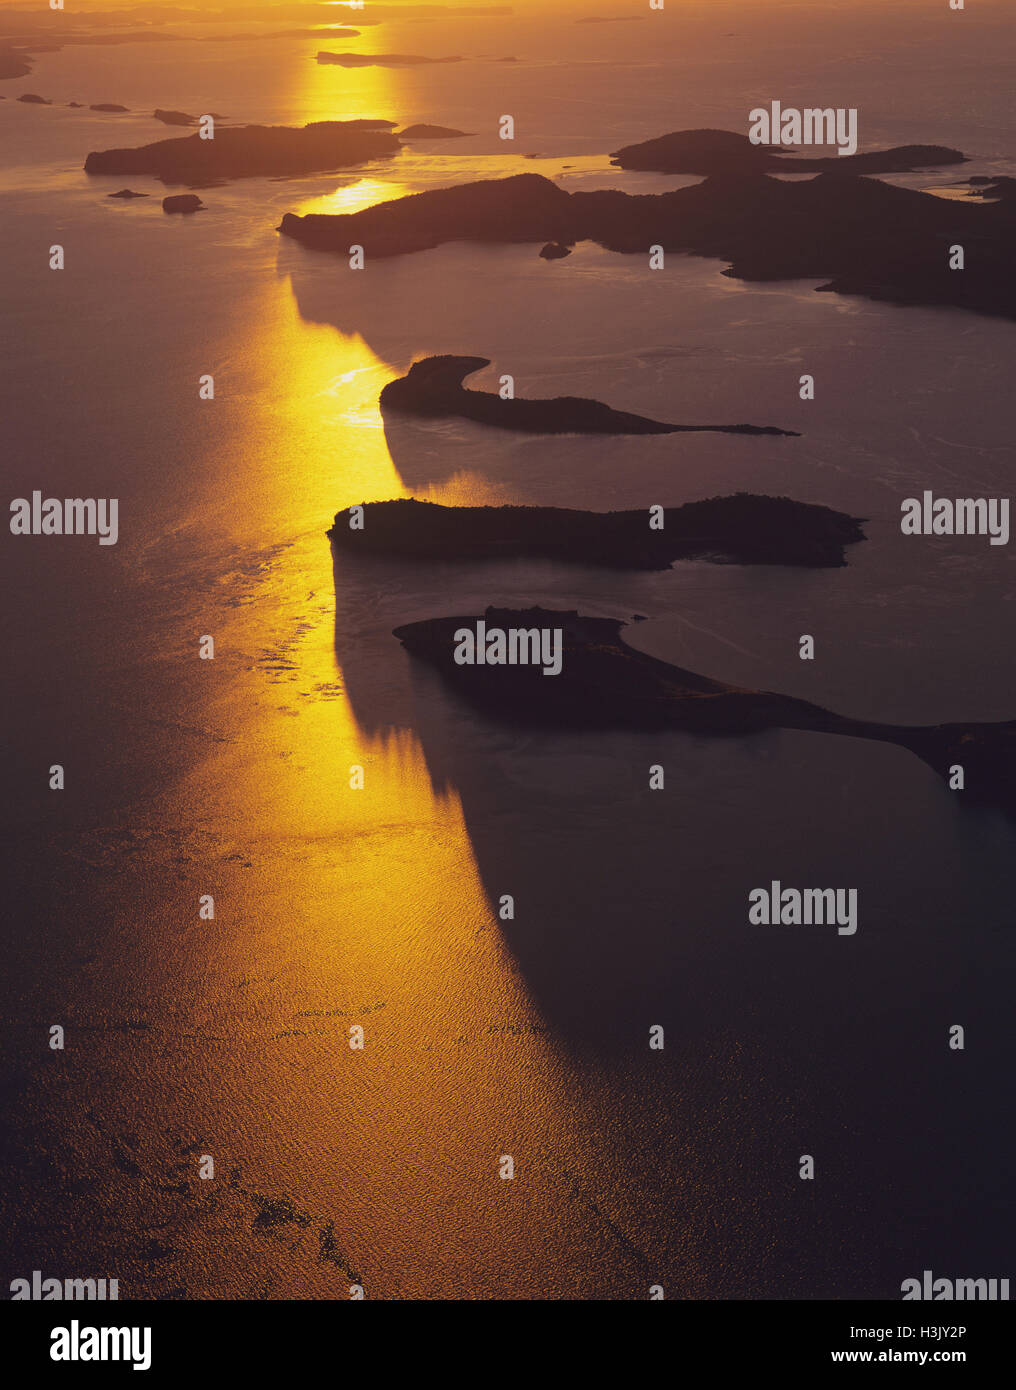 Islands in Talbot Bay at sunset, aerial photograph. Stock Photo